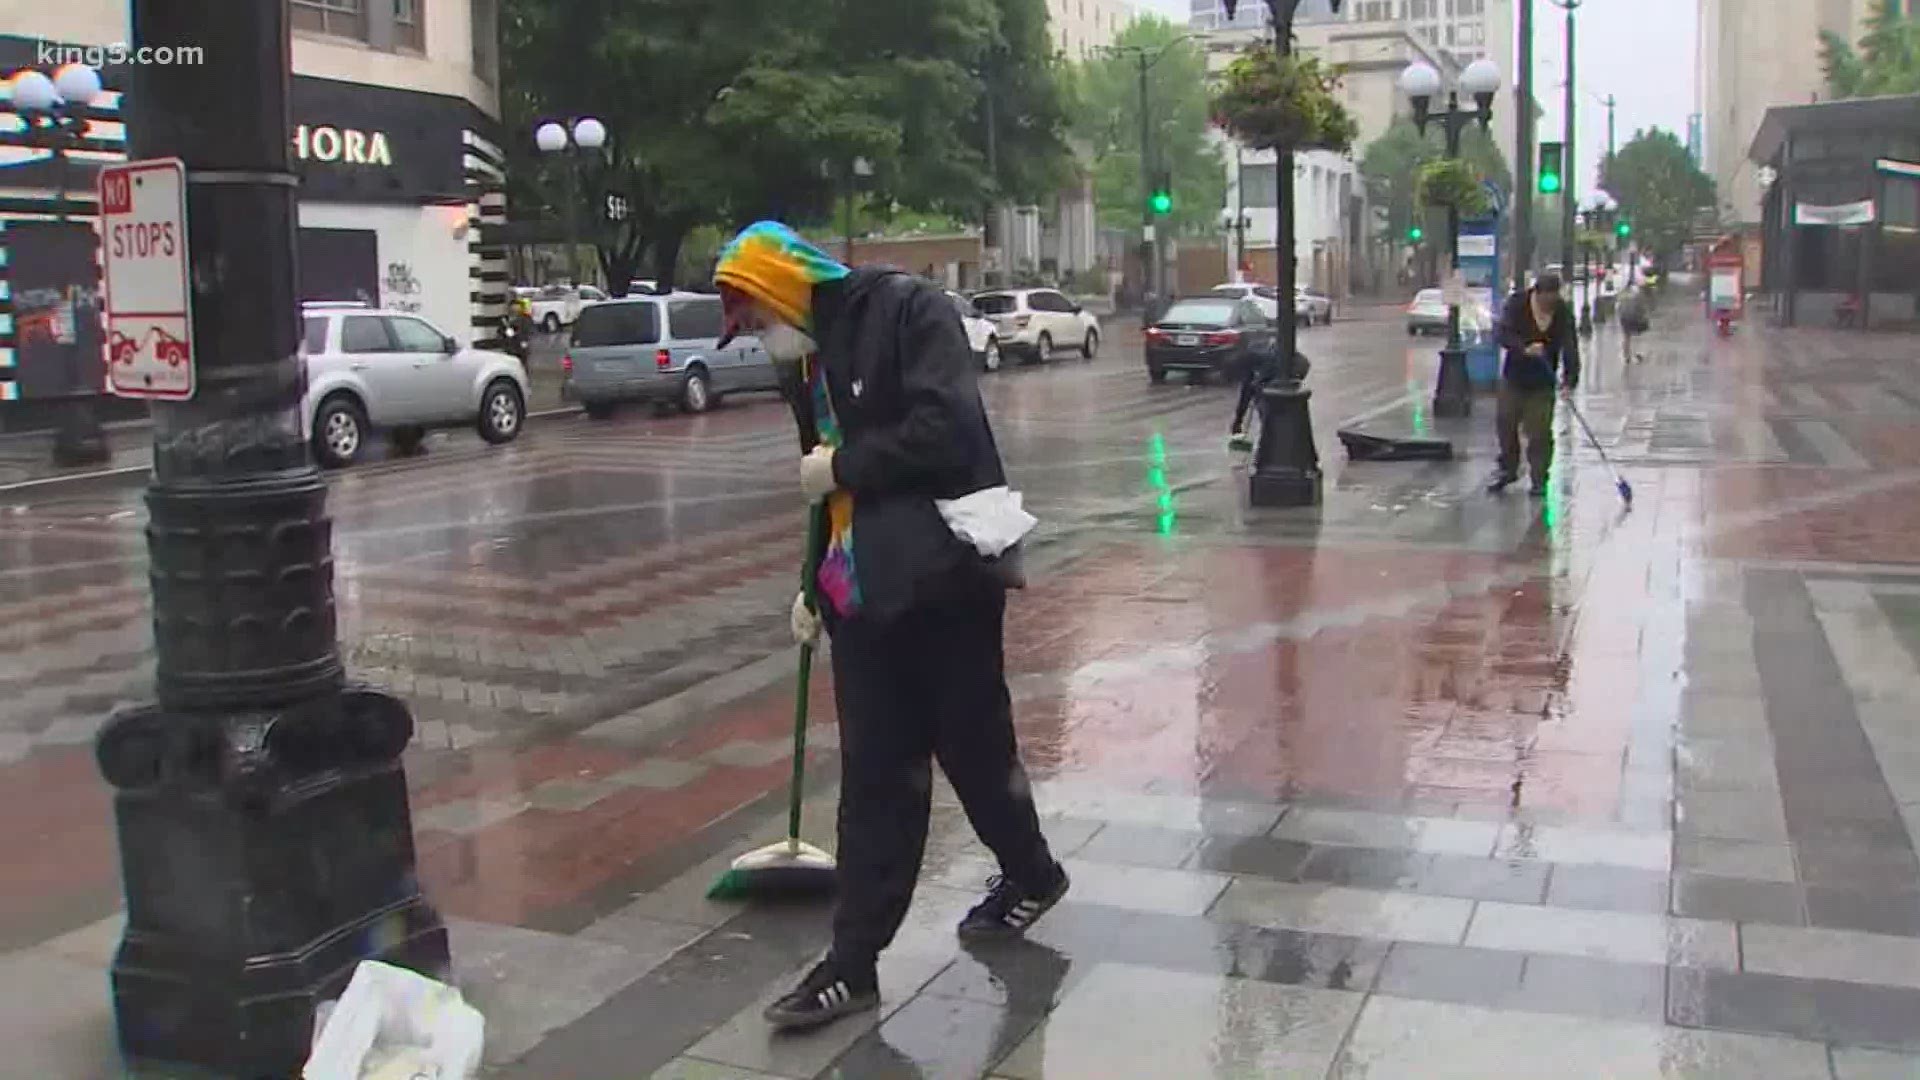 Community members started showing up in downtown Seattle Sunday morning to help clean up after peaceful protests turned destructive Saturday.